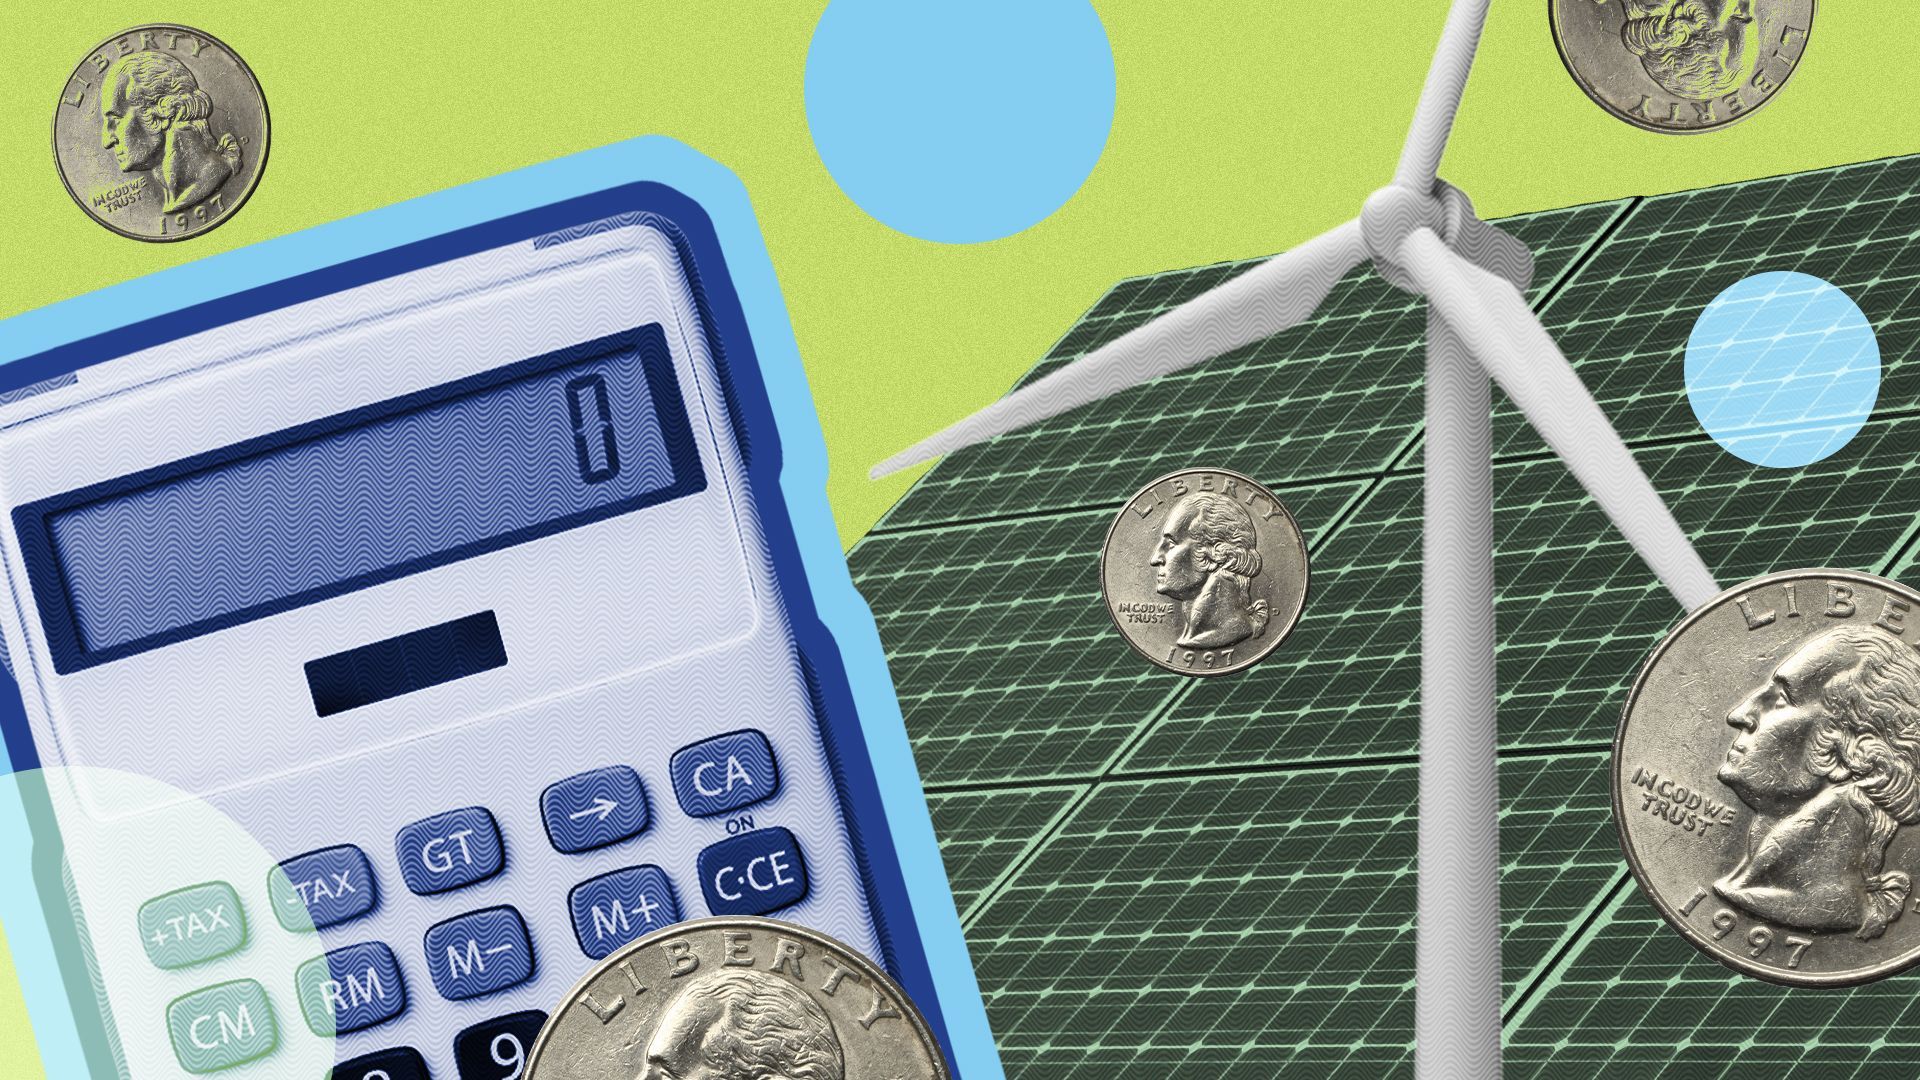 Illustration of a calculator surrounded by clean energy imagery, abstract shapes, and money elements.